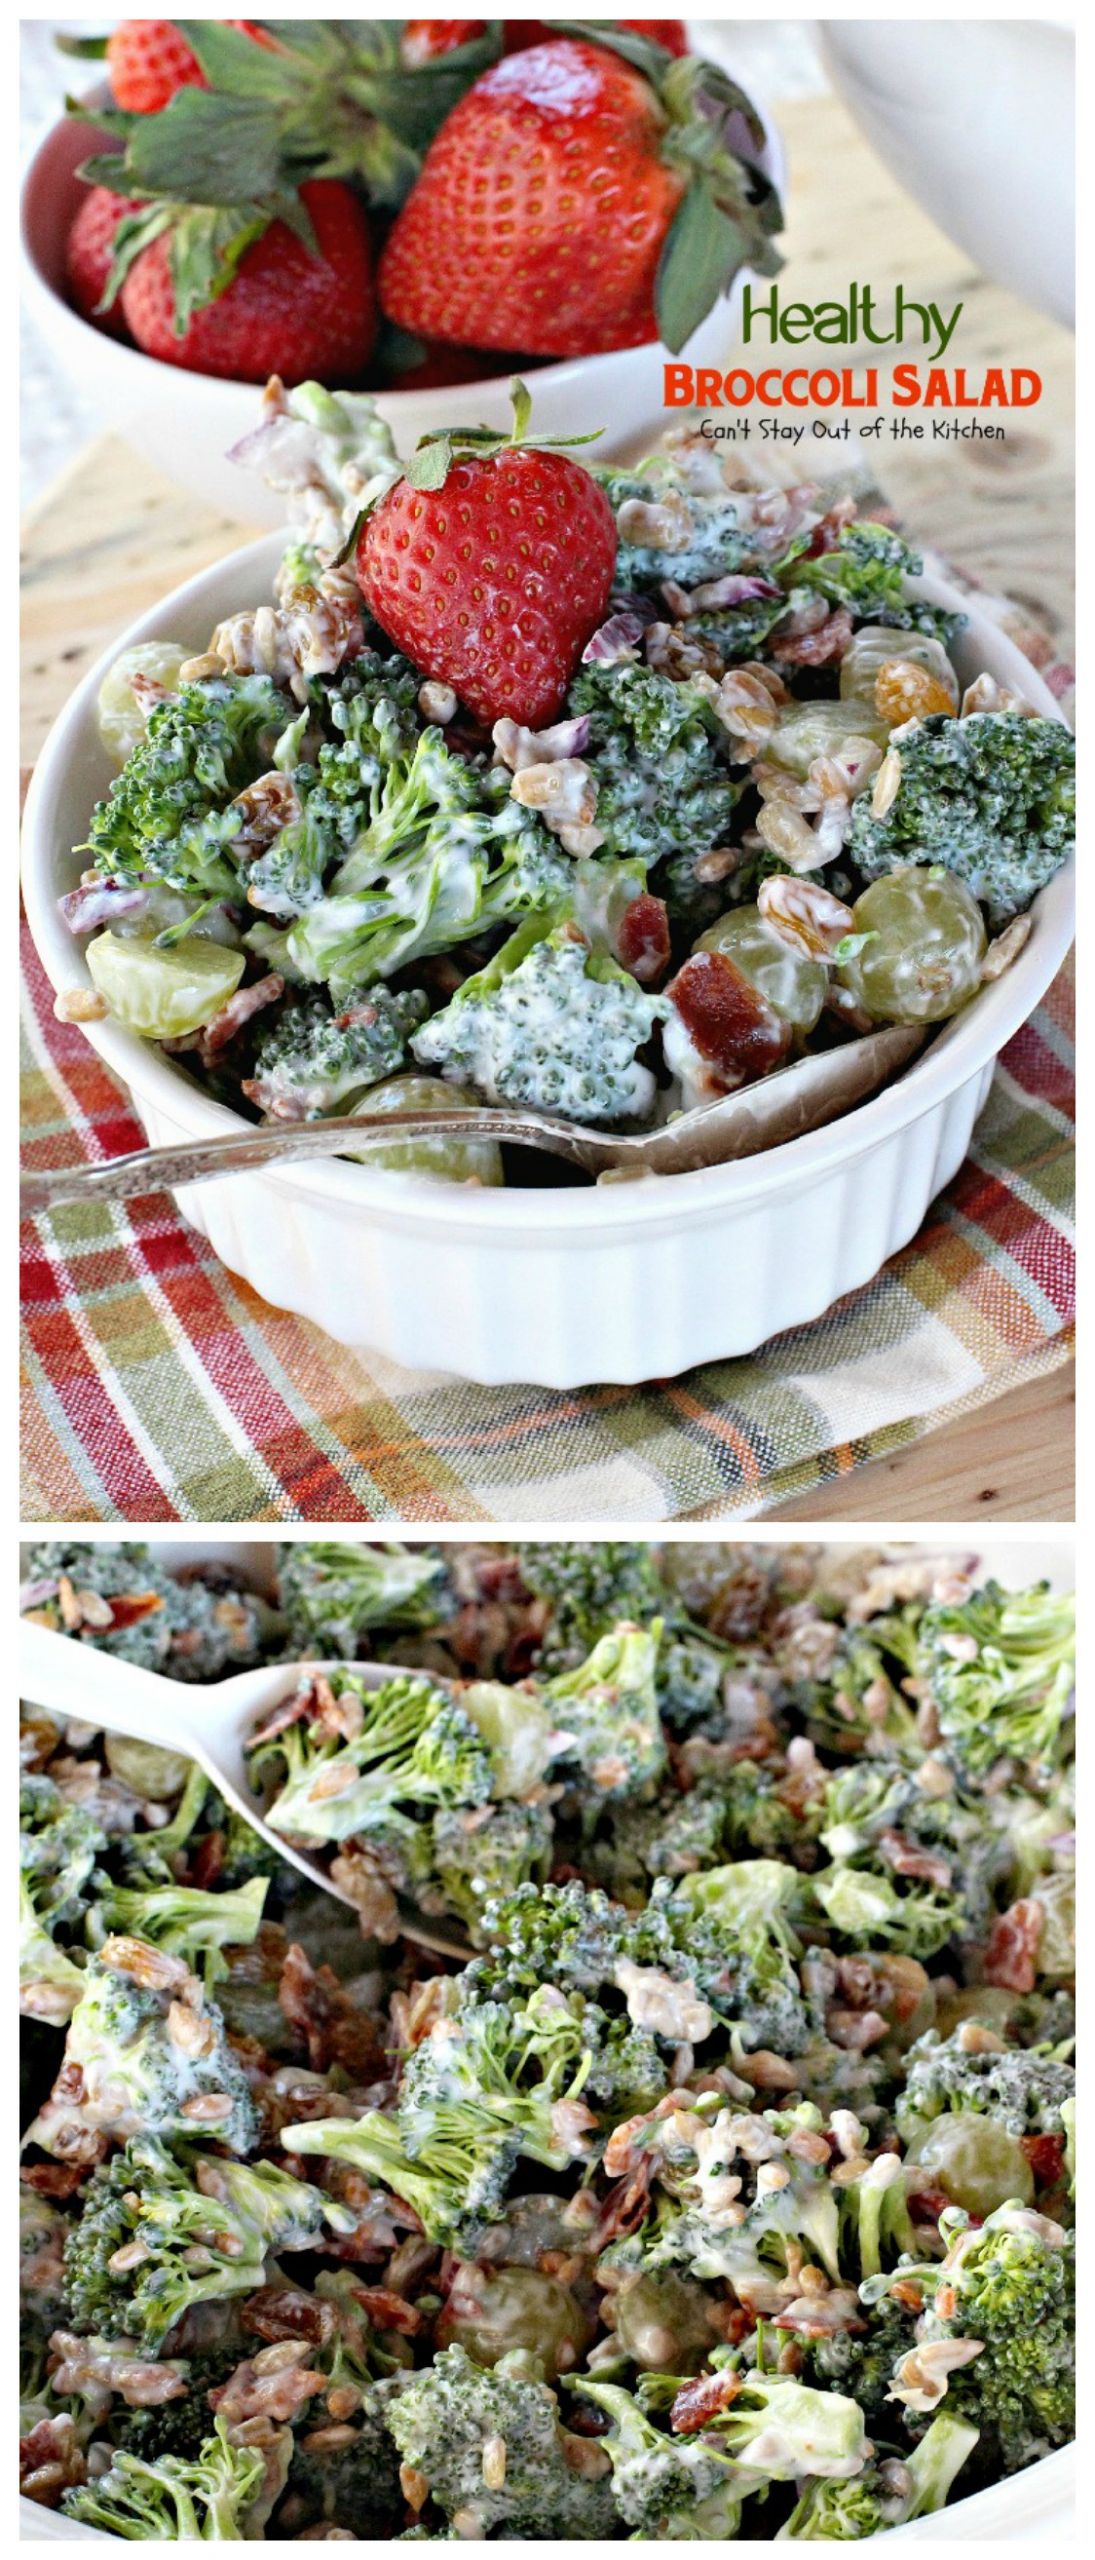 Healthy Broccoli Salad Recipe
 Healthy Broccoli Salad – Can t Stay Out of the Kitchen